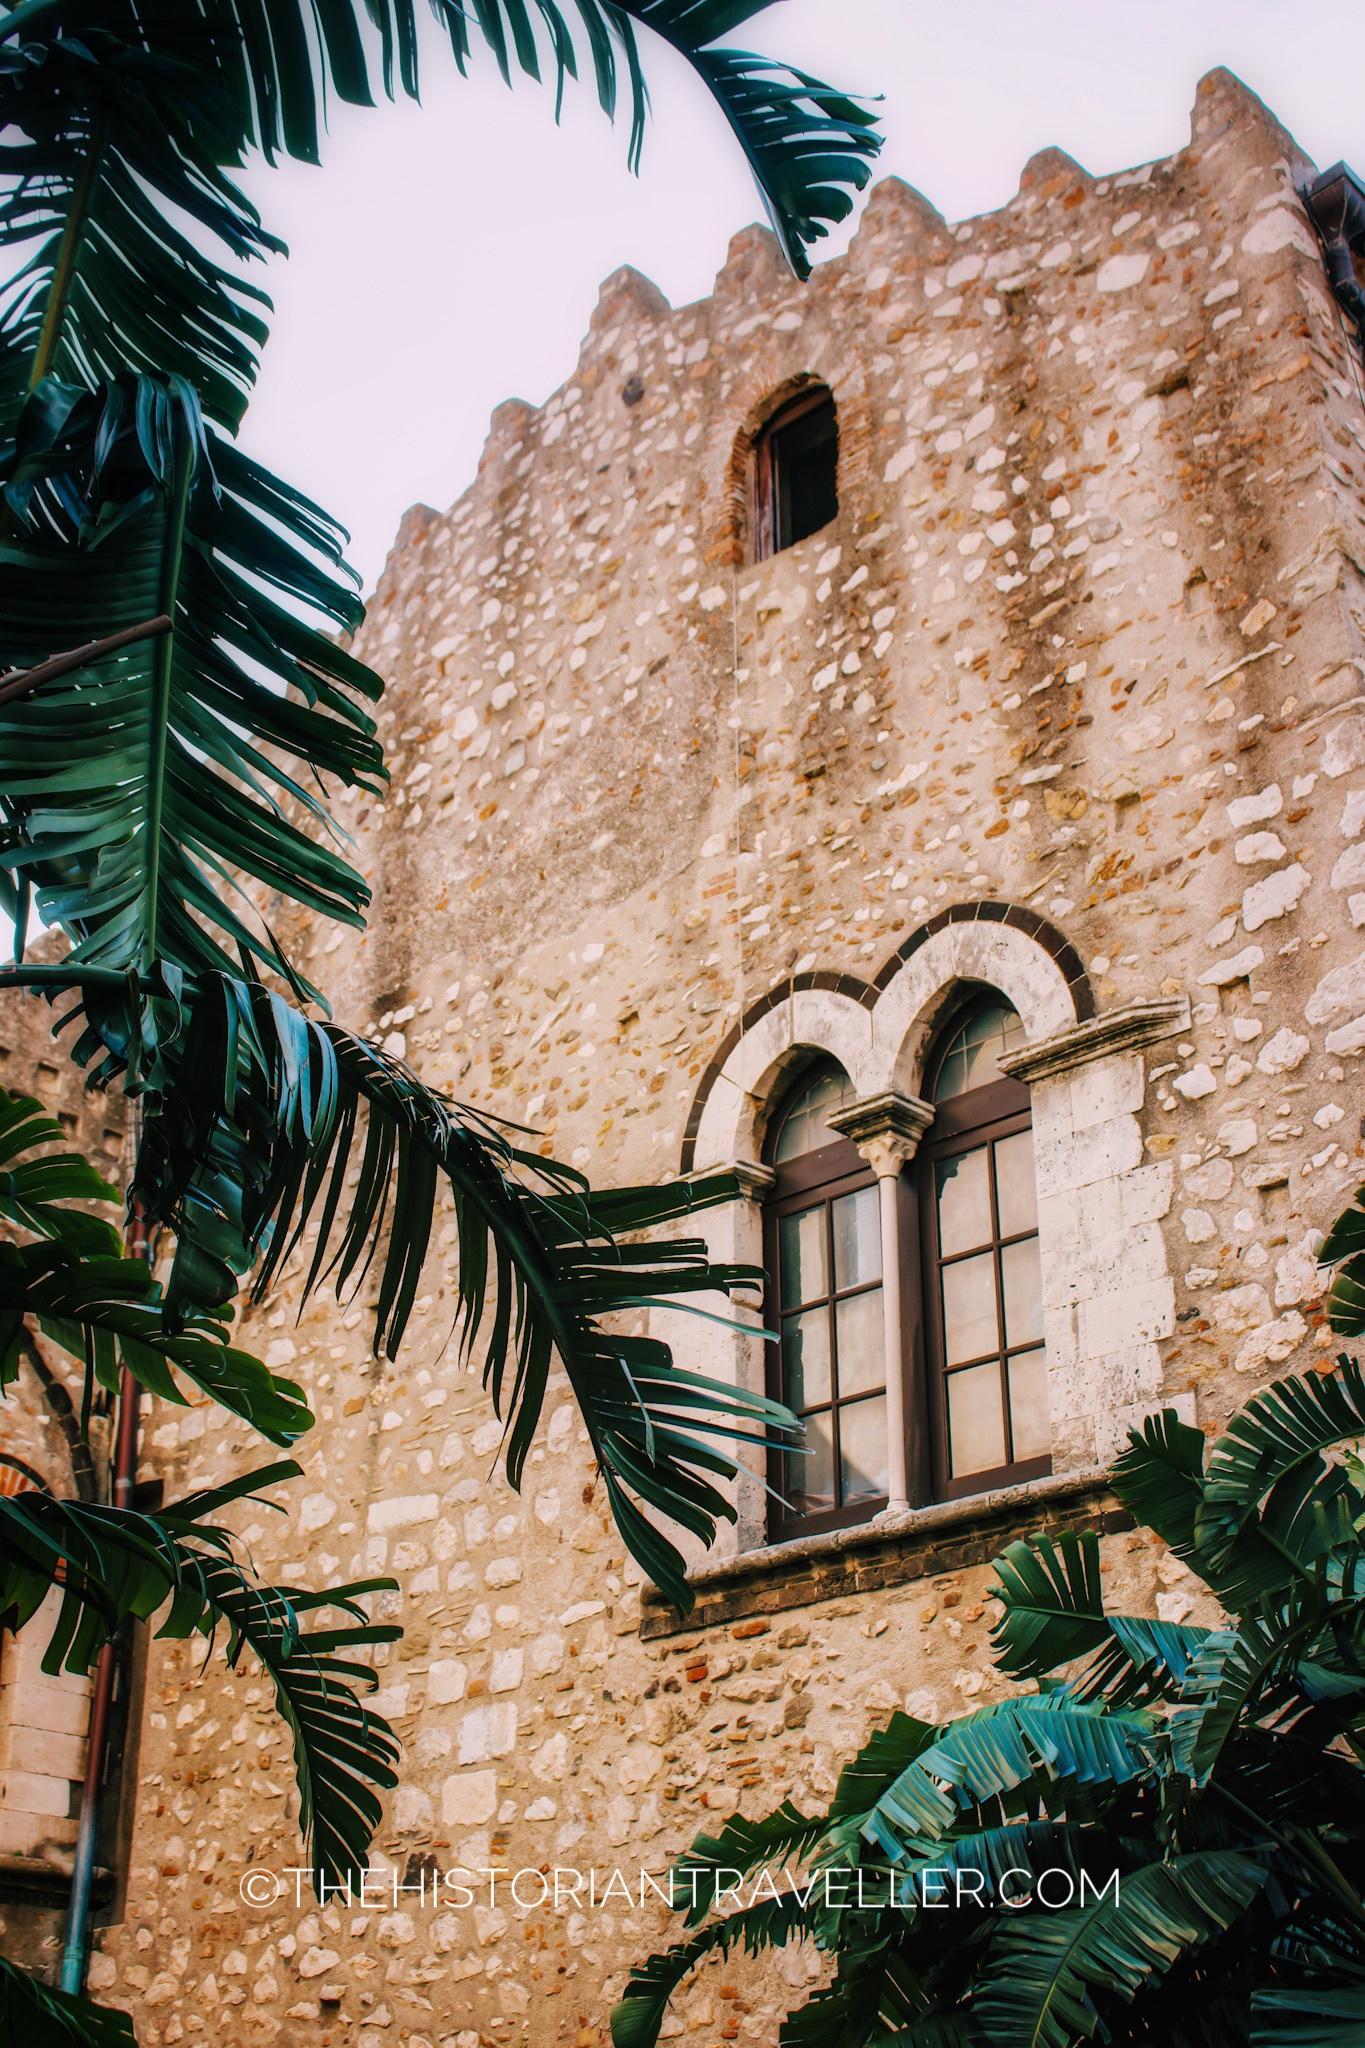 An insider's guide to Taormina - Palazzo Corvaja facade and inner courtyard